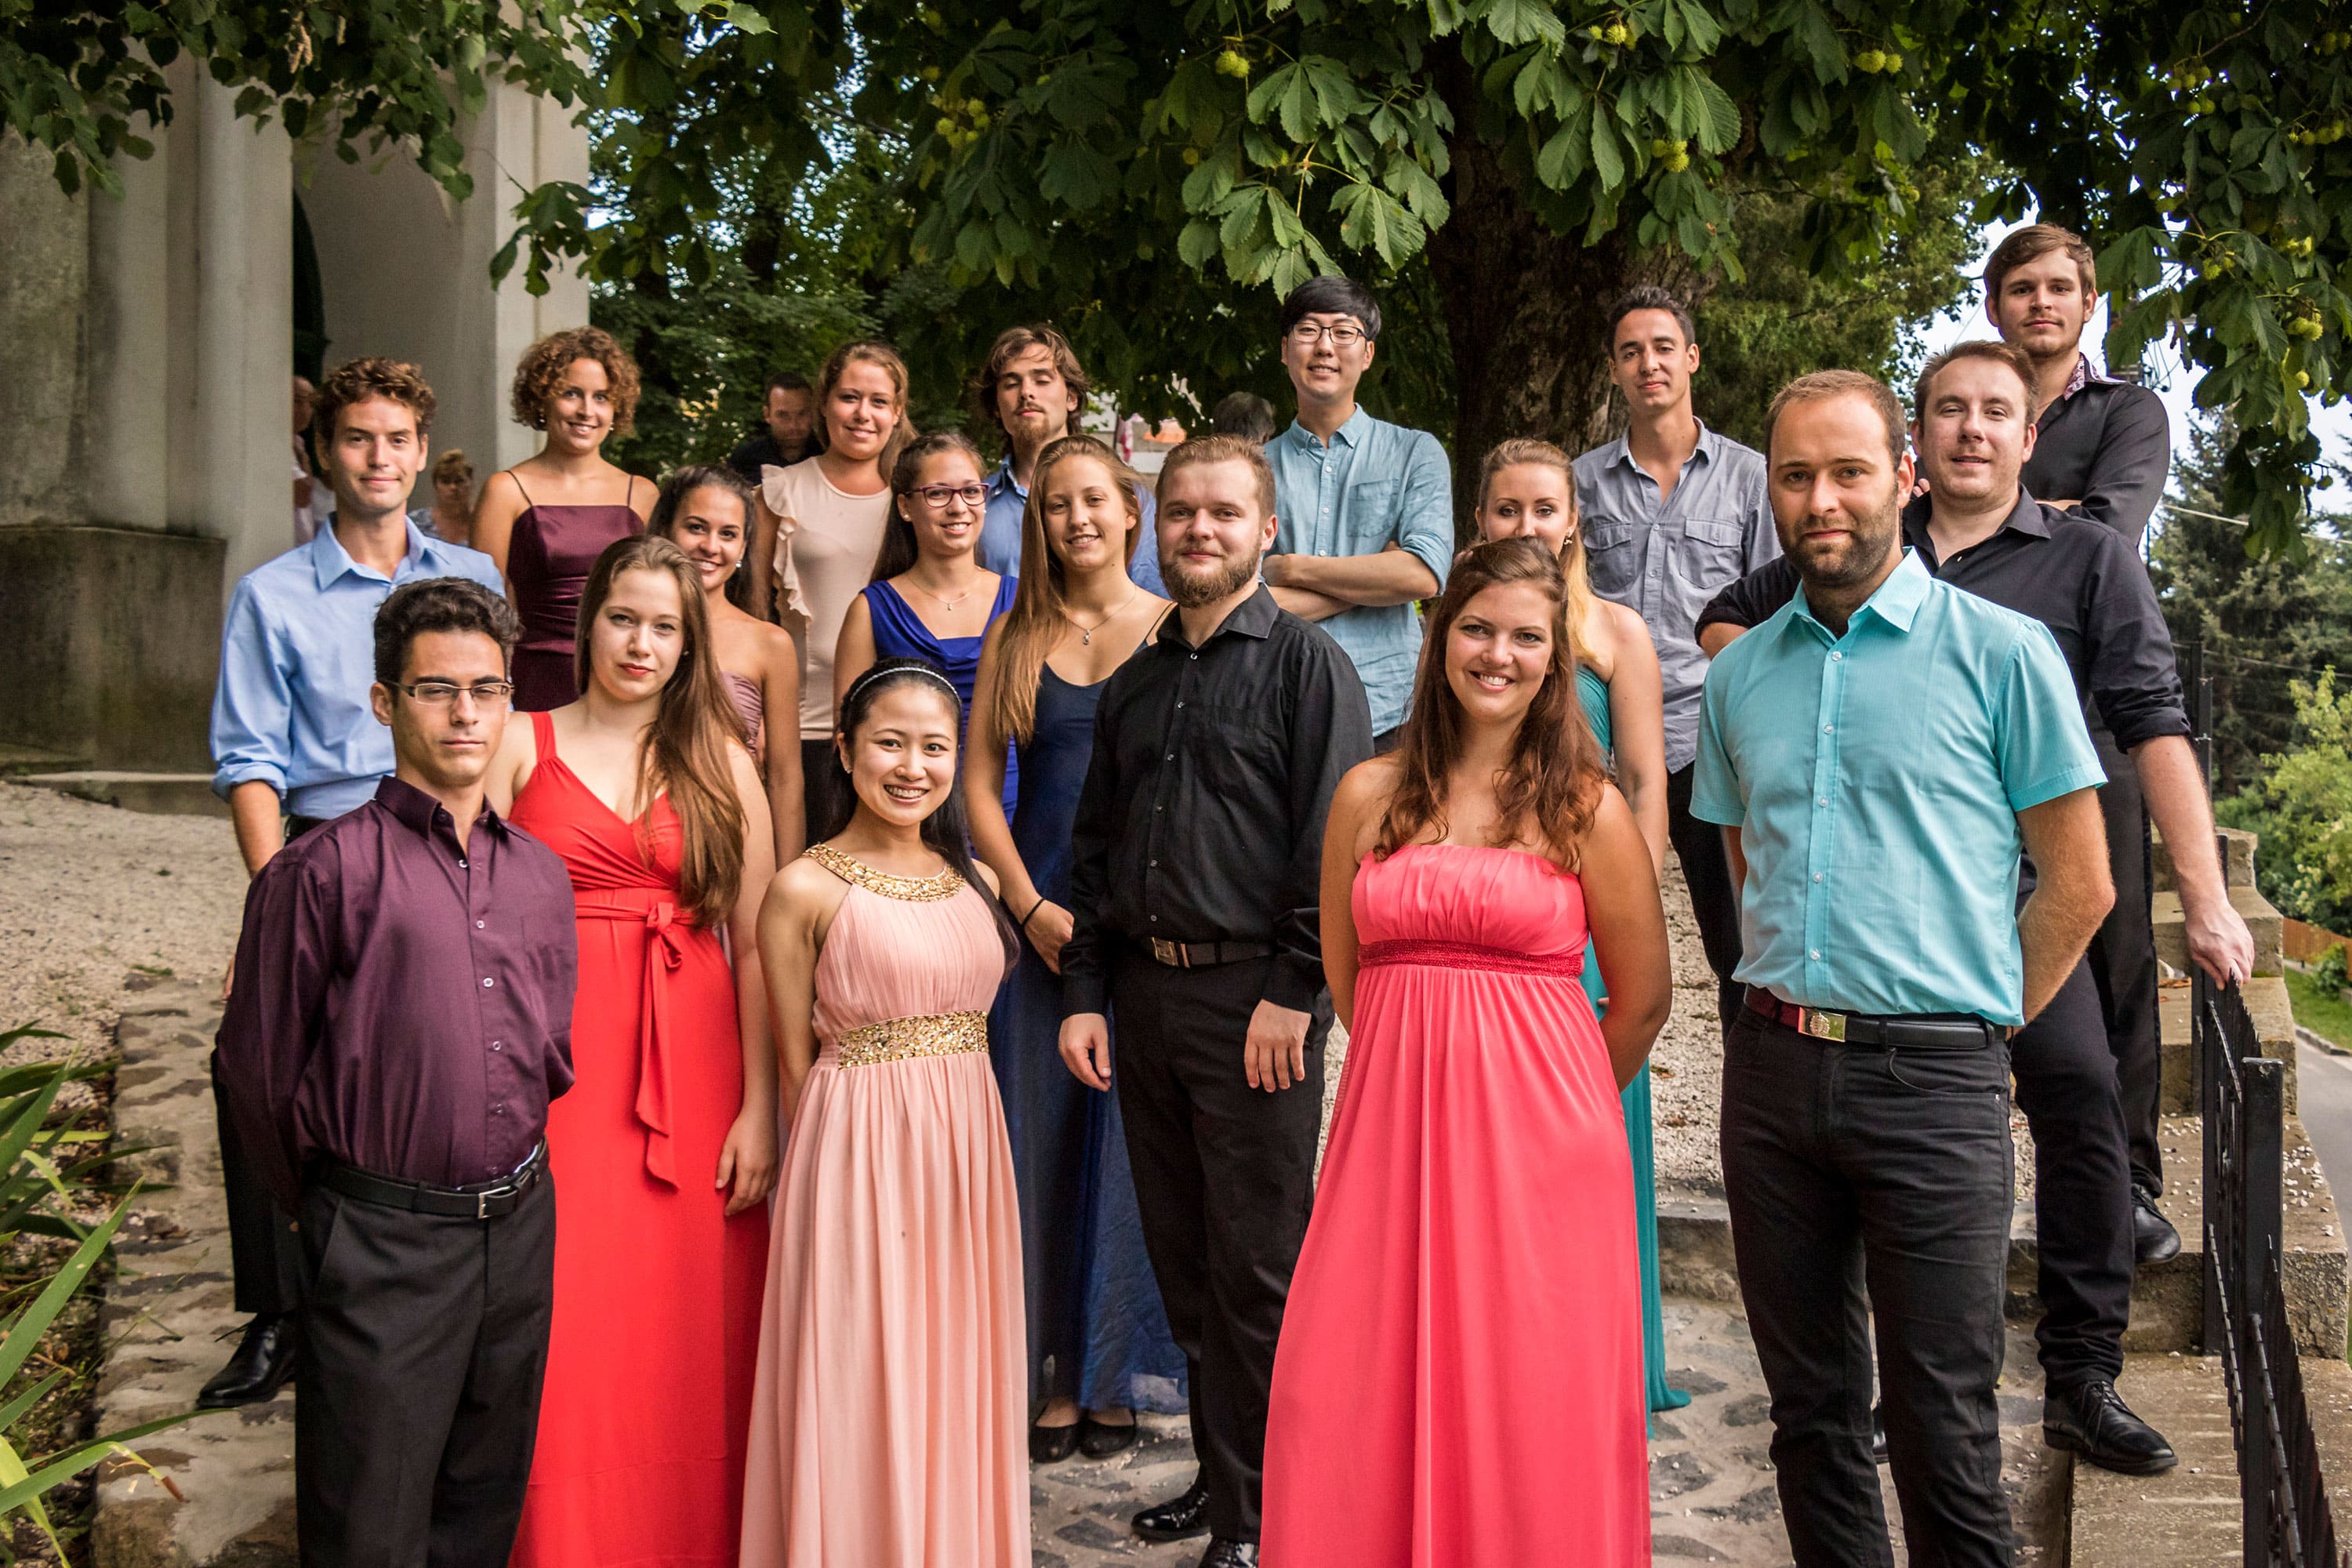 Camerata Pelsonore group photo https://todaymediaproduction.com